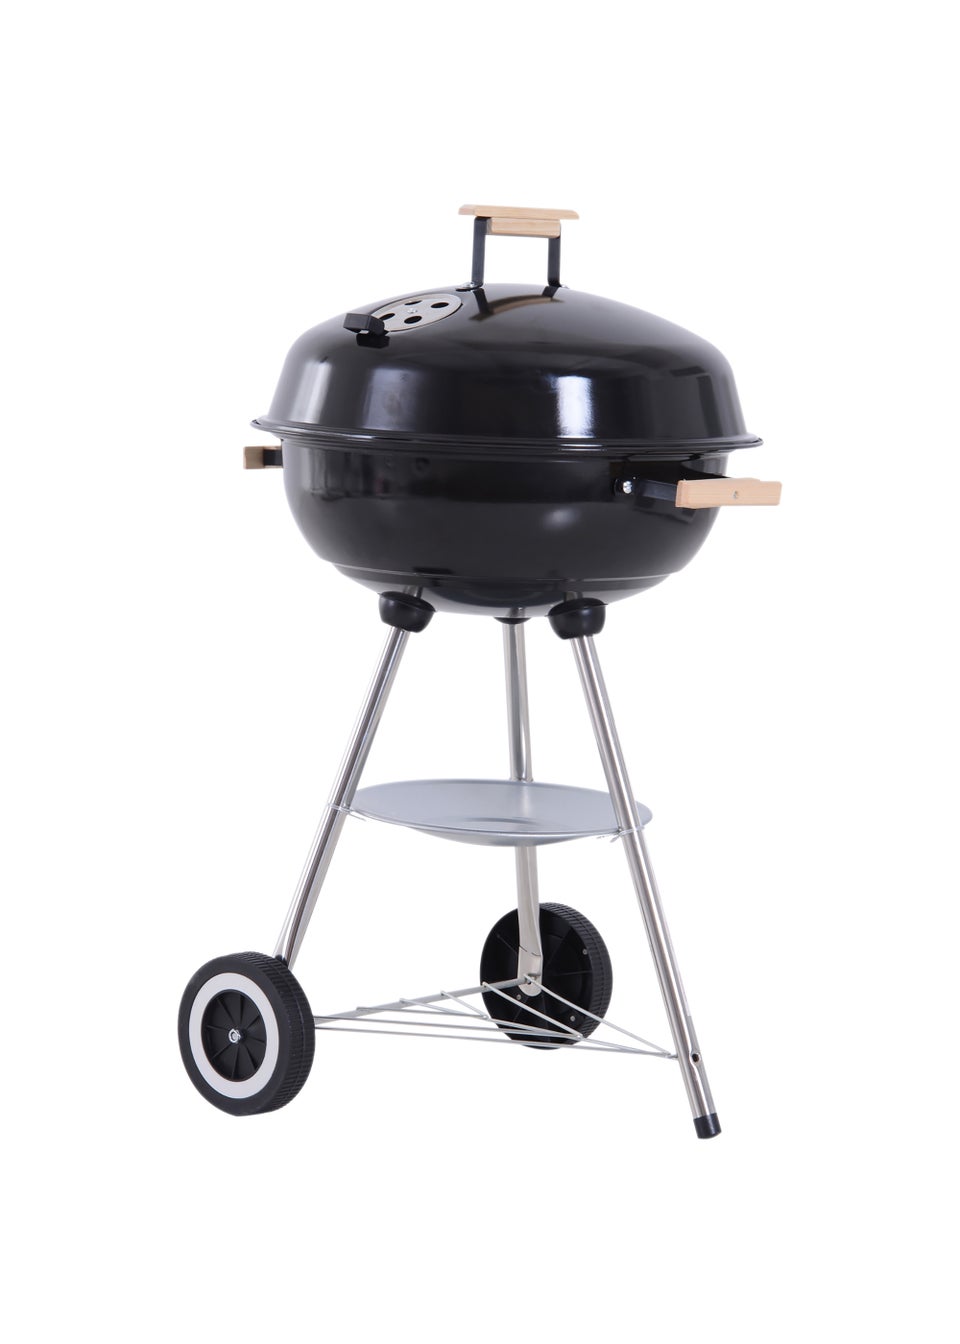 Outsunny Portable Round Charcoal Barbecue Grill (48cm x 56cm x 85cm)